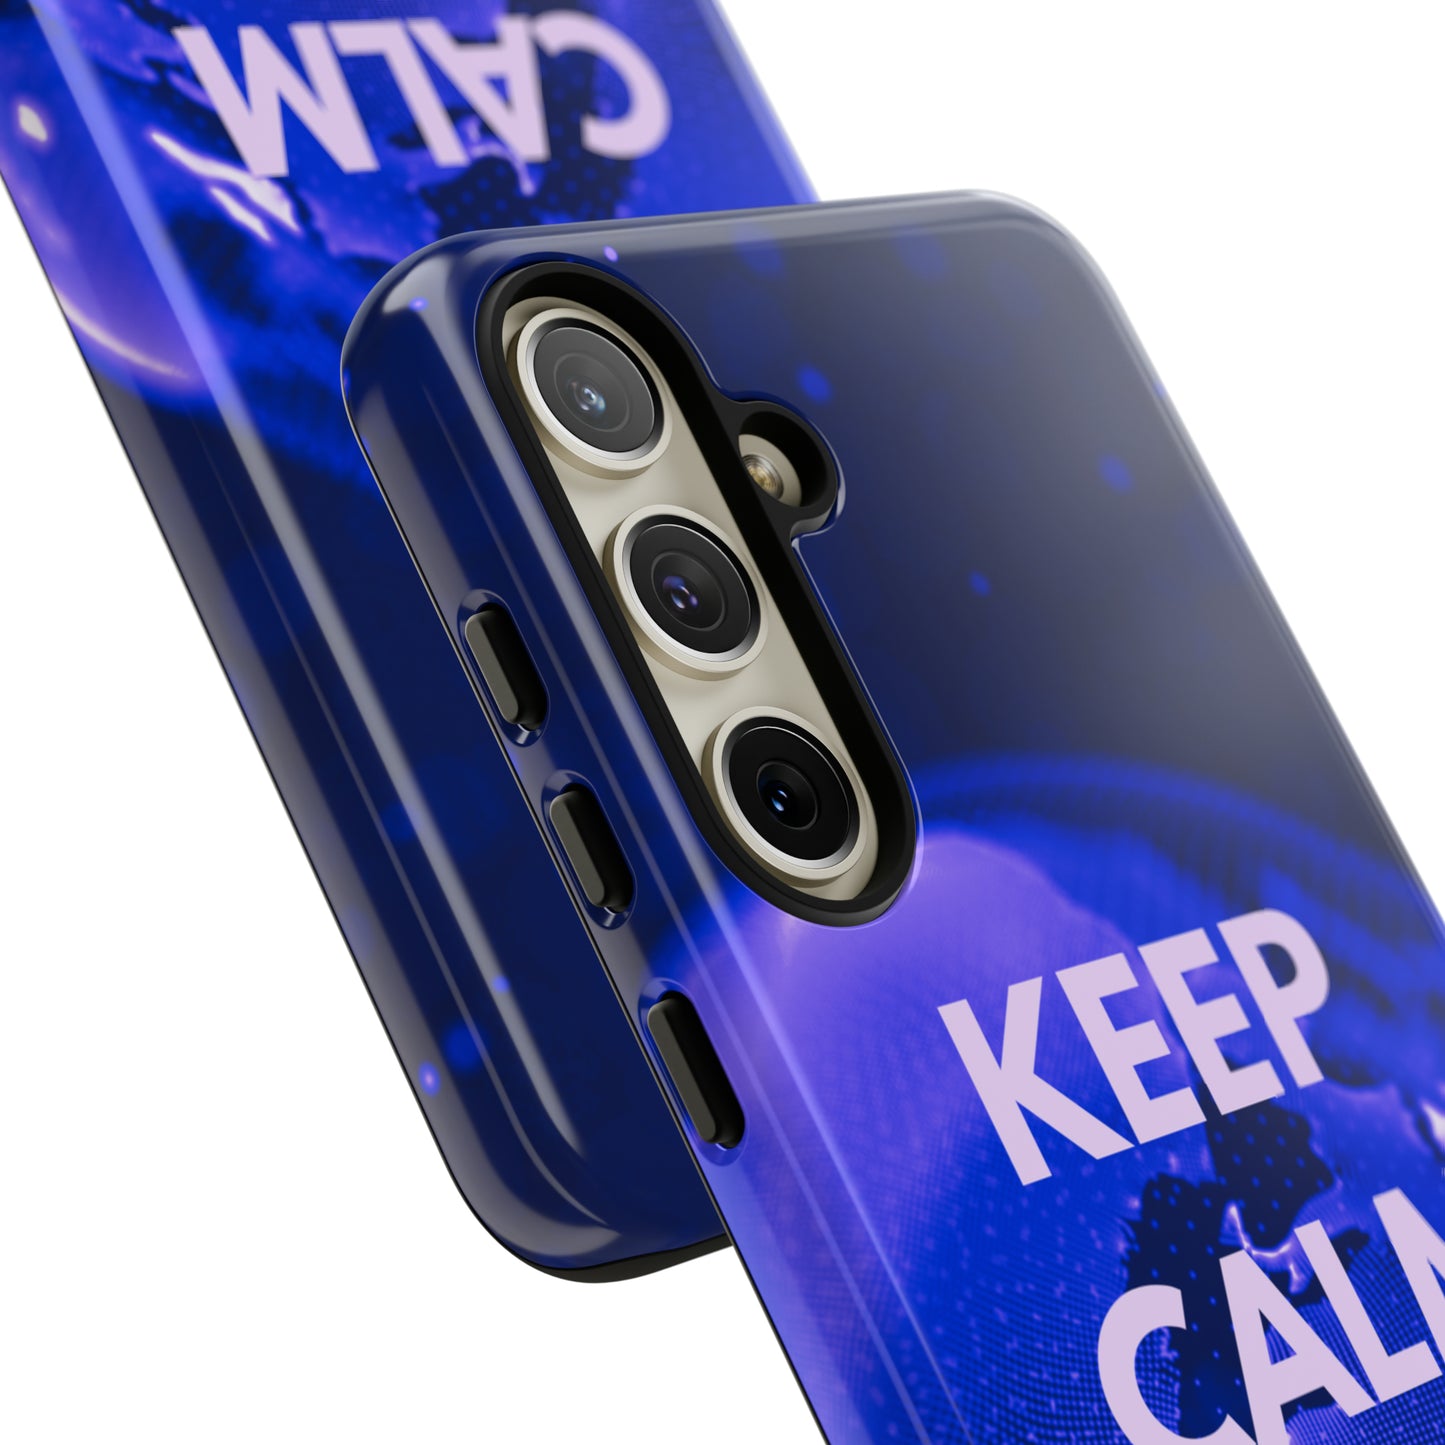 Keep Calm and Bubble Destiny 2 Themed Phone Case